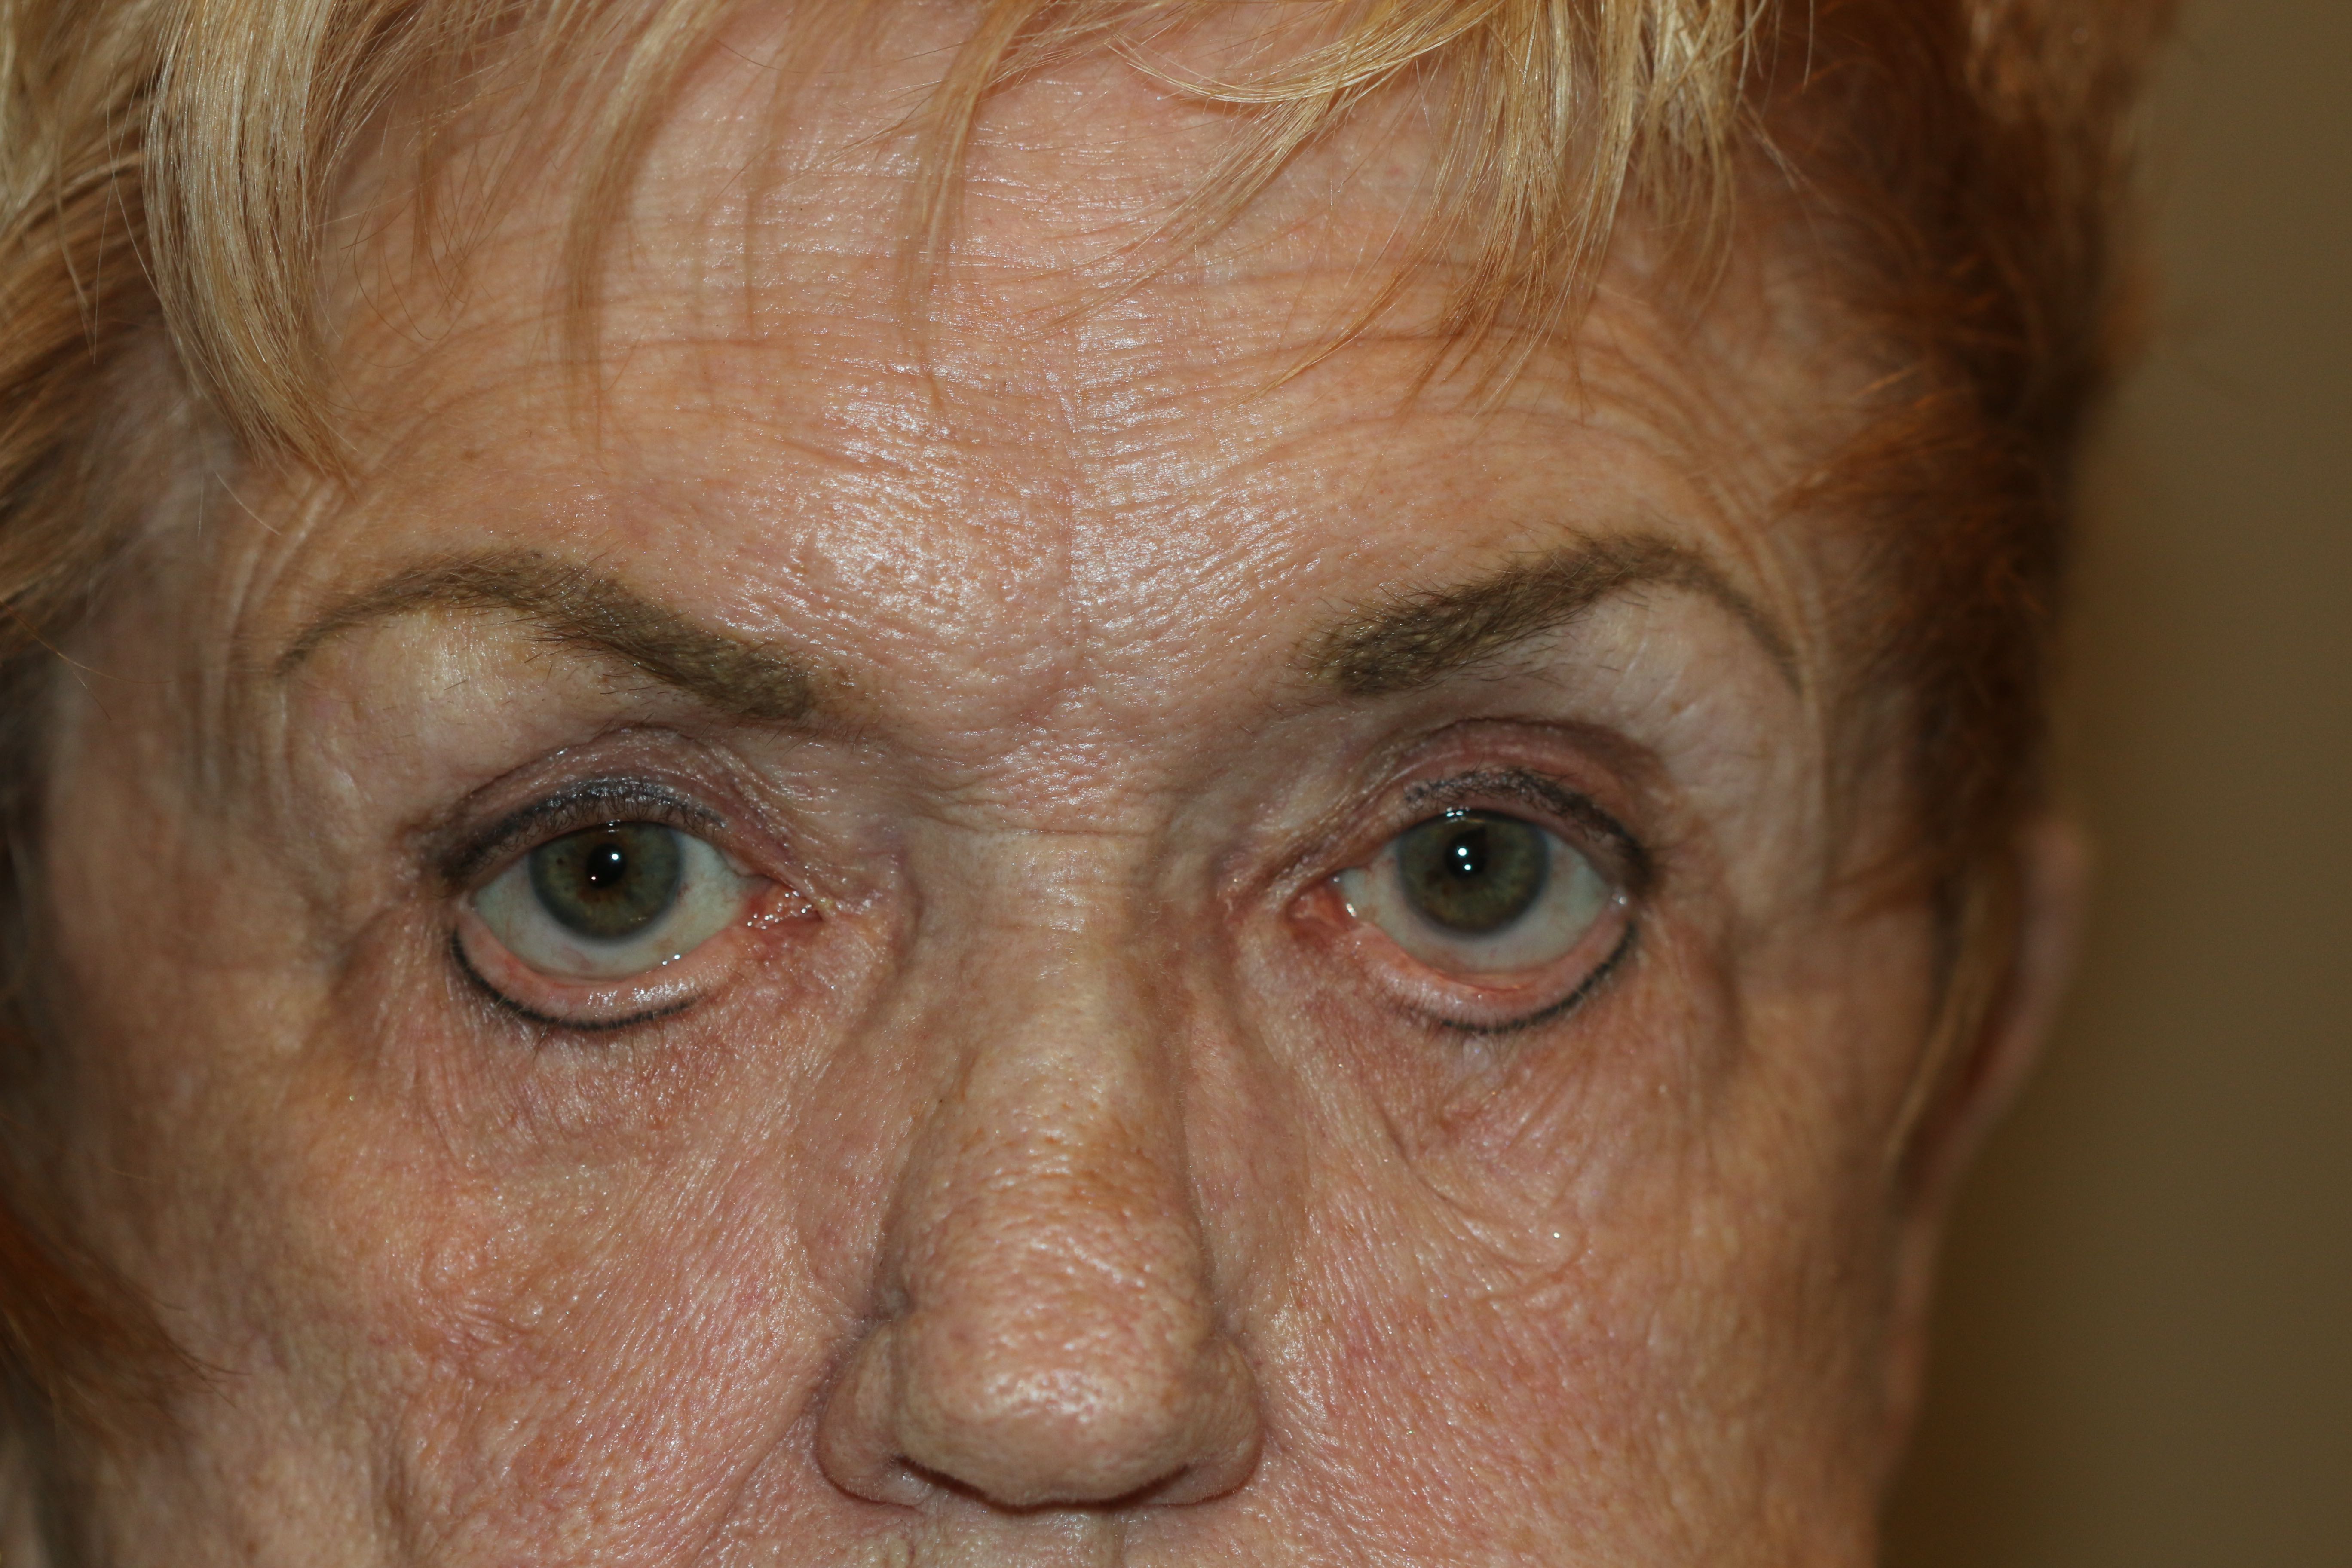 Lower Eyelid Laxity: patient presents with tearing but also dryness